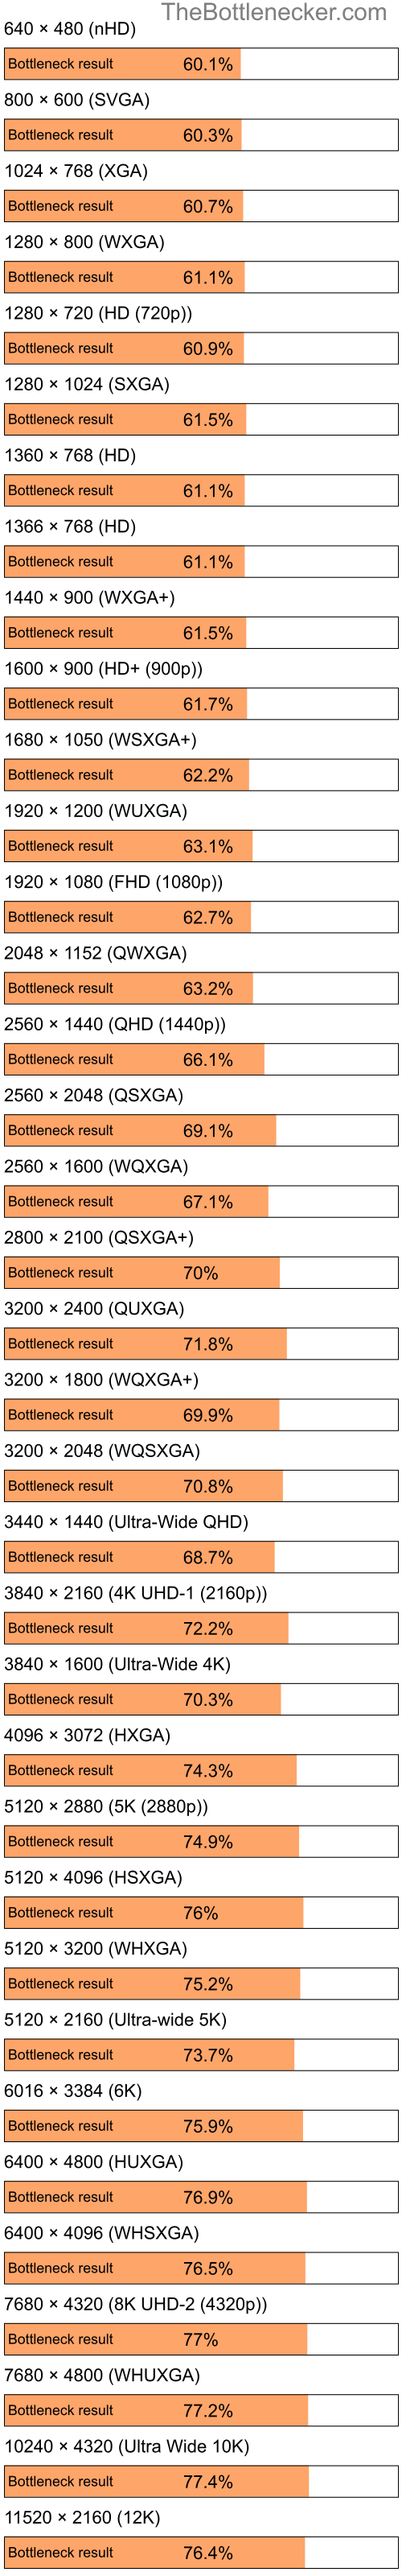 Bottleneck results by resolution for Intel Celeron M 410 and AMD Radeon X1550 in Processor Intense Tasks